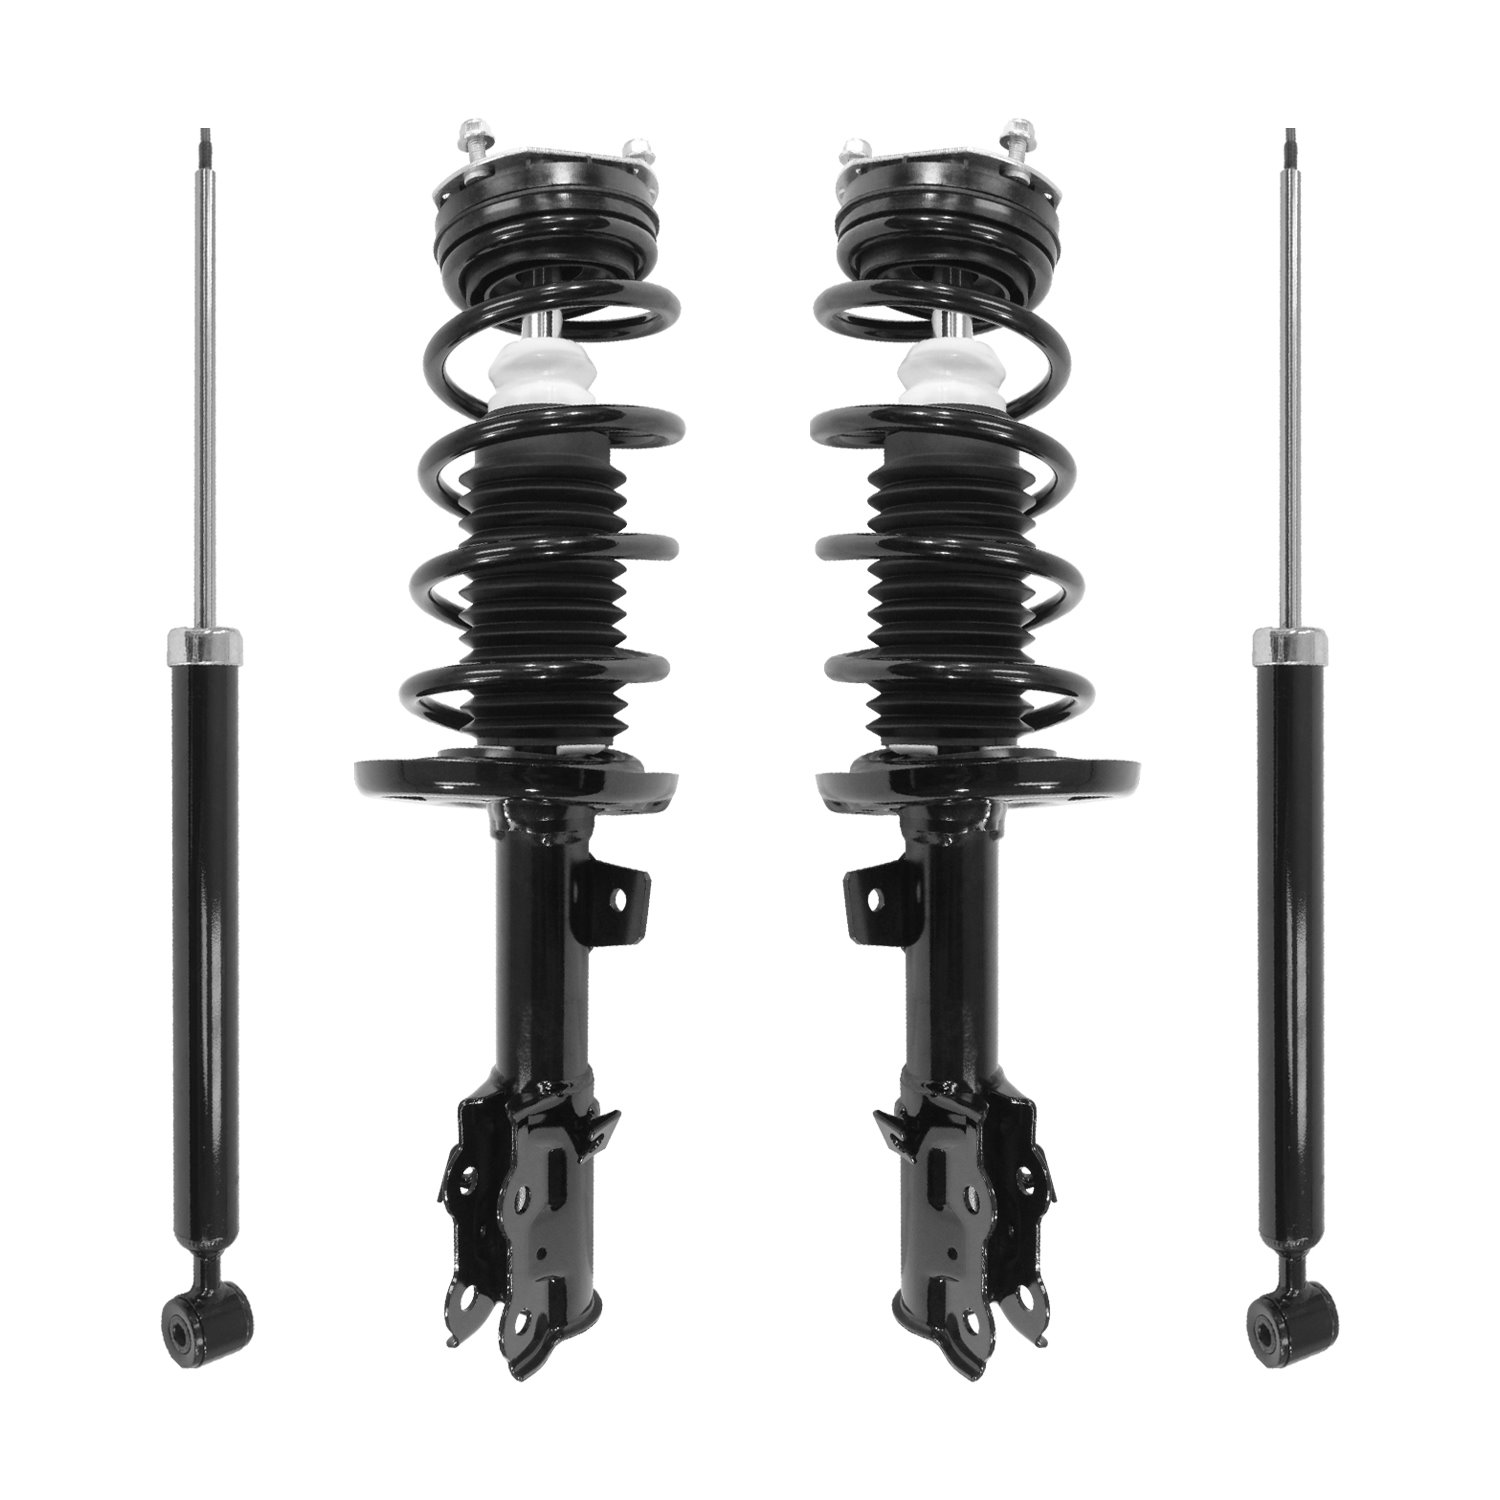 4-11937-252140-001 Front & Rear Suspension Strut & Coil Spring Assembly Fits Select Ford Fiesta